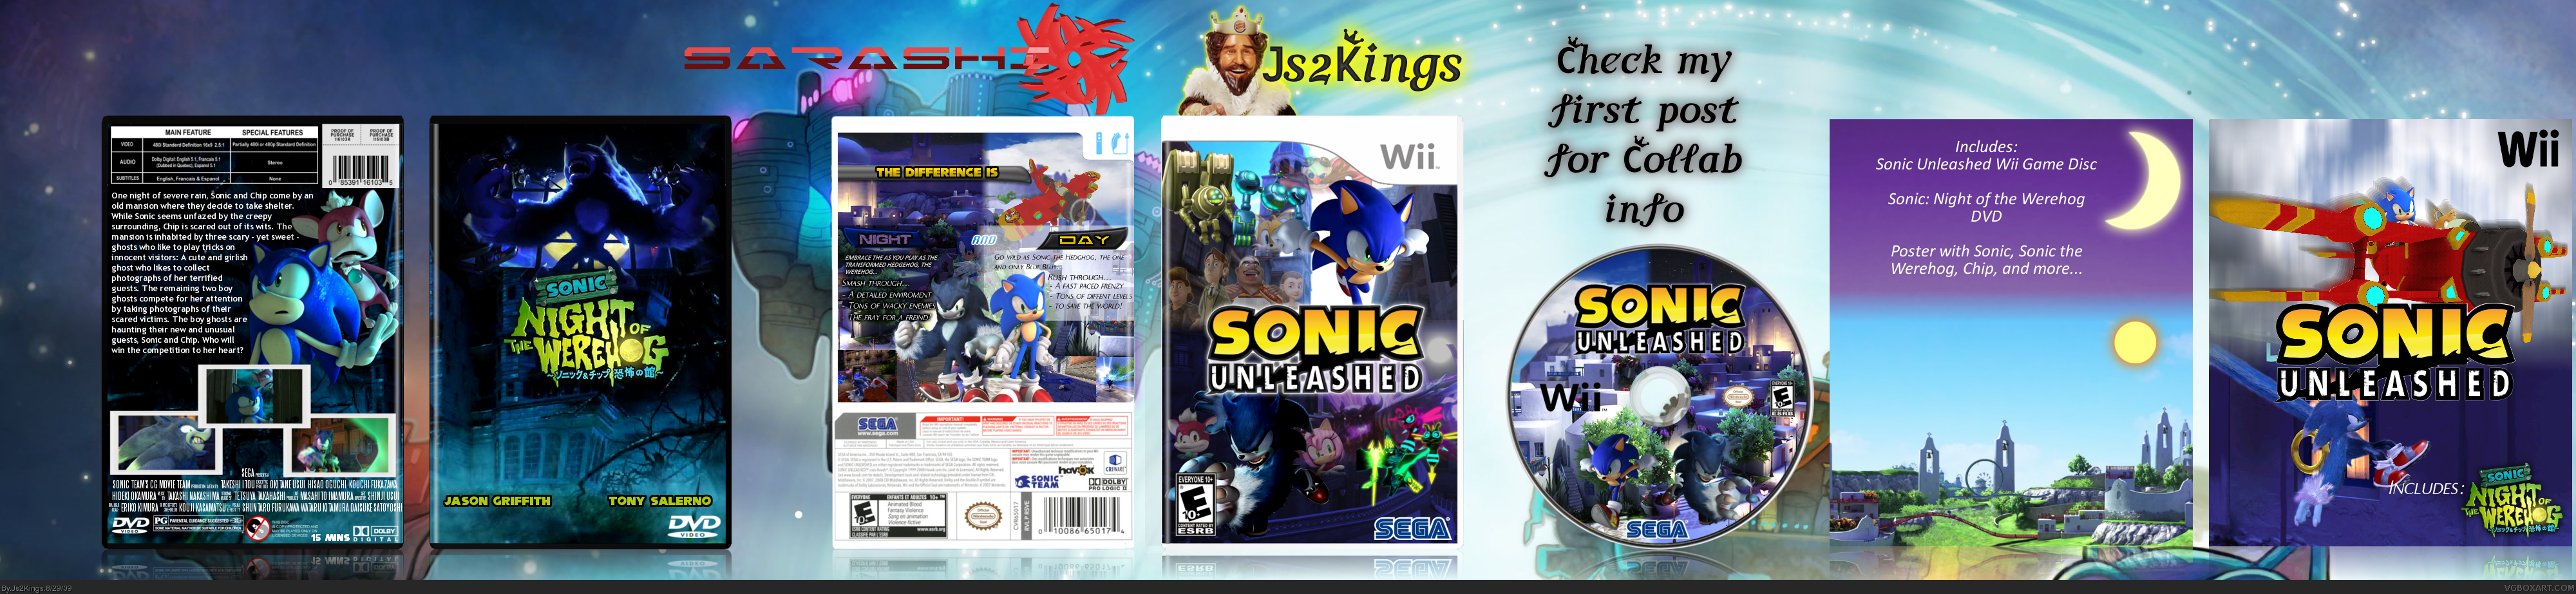 Sonic Unleashed: Collector's Edition box cover